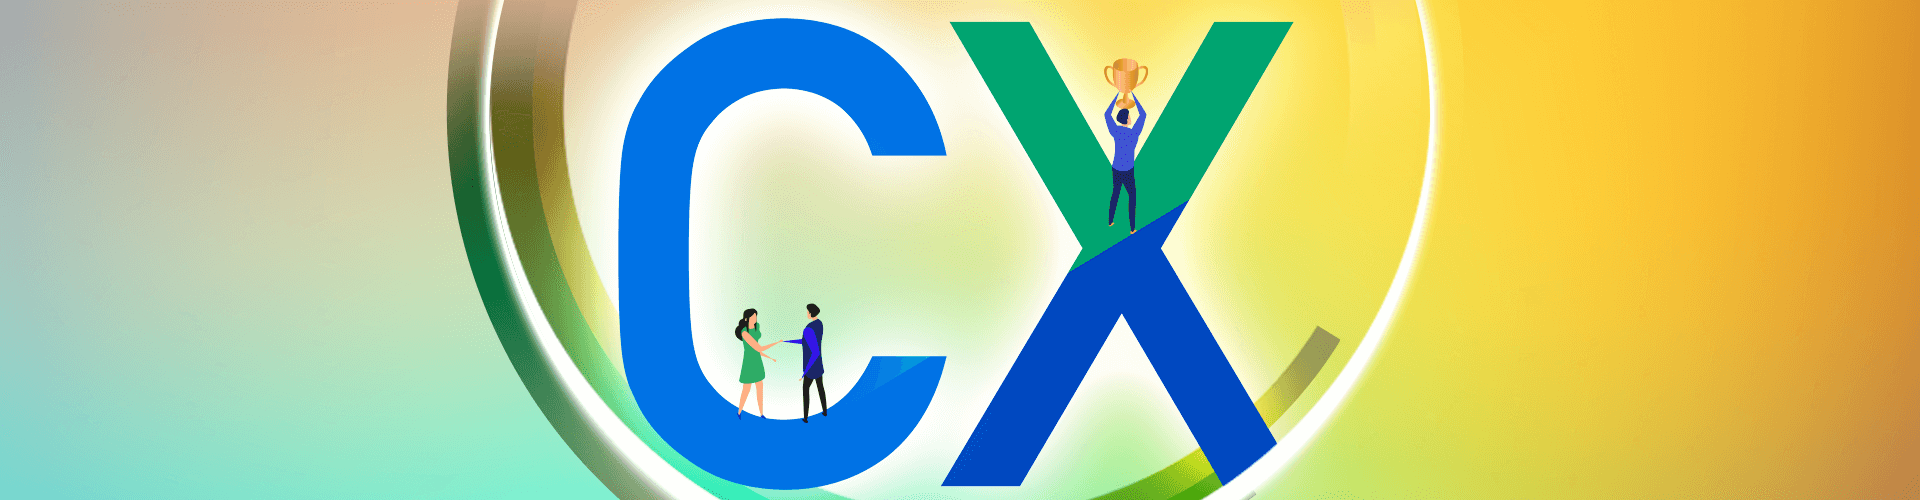 Illustrated people standing on letters C and X